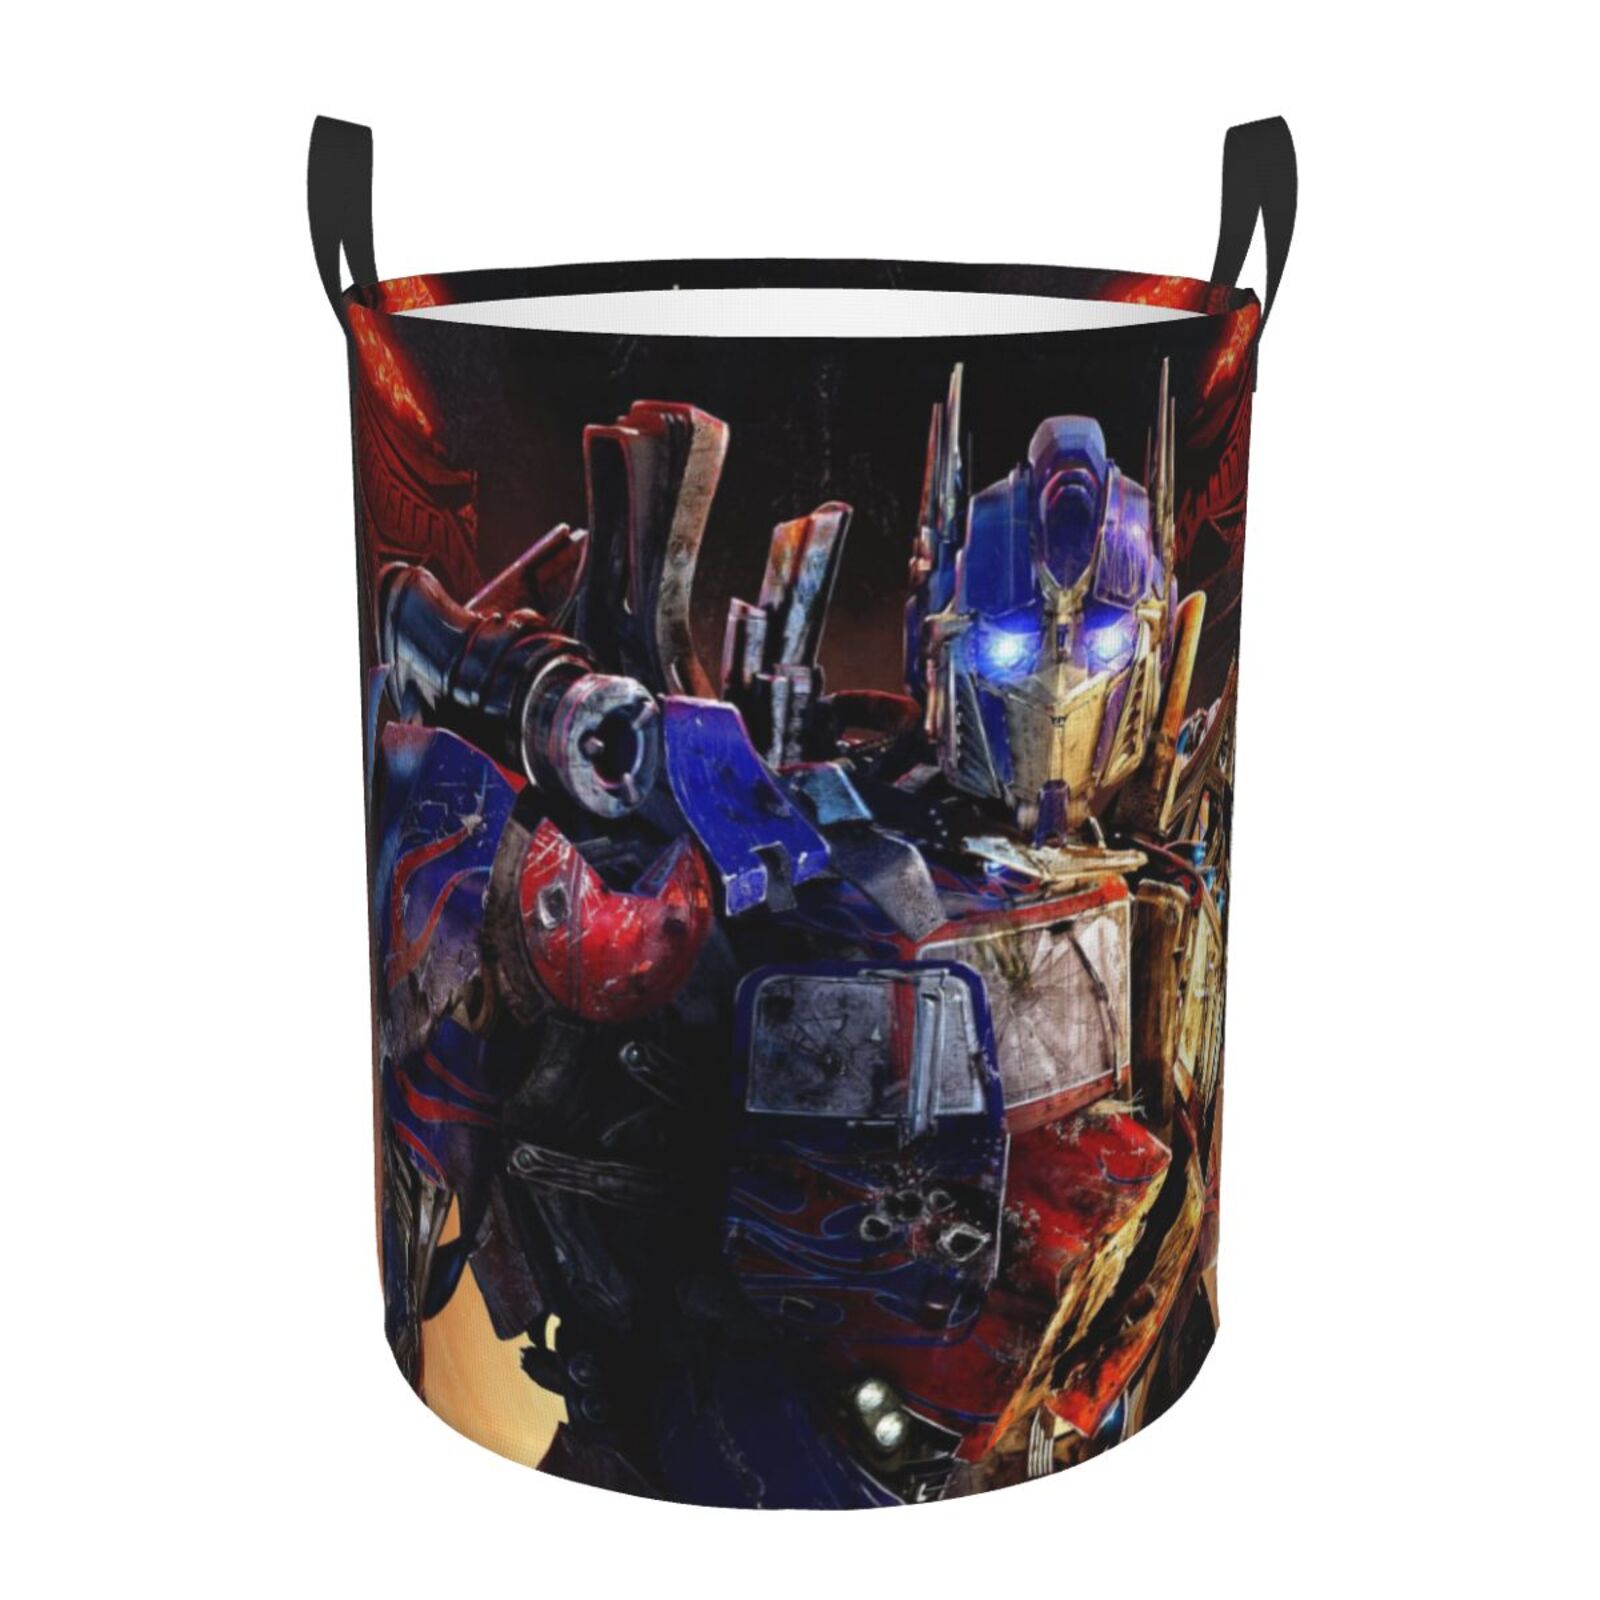 Transformers Large Laundry Basket With Handle, Collapsible Laundry ...